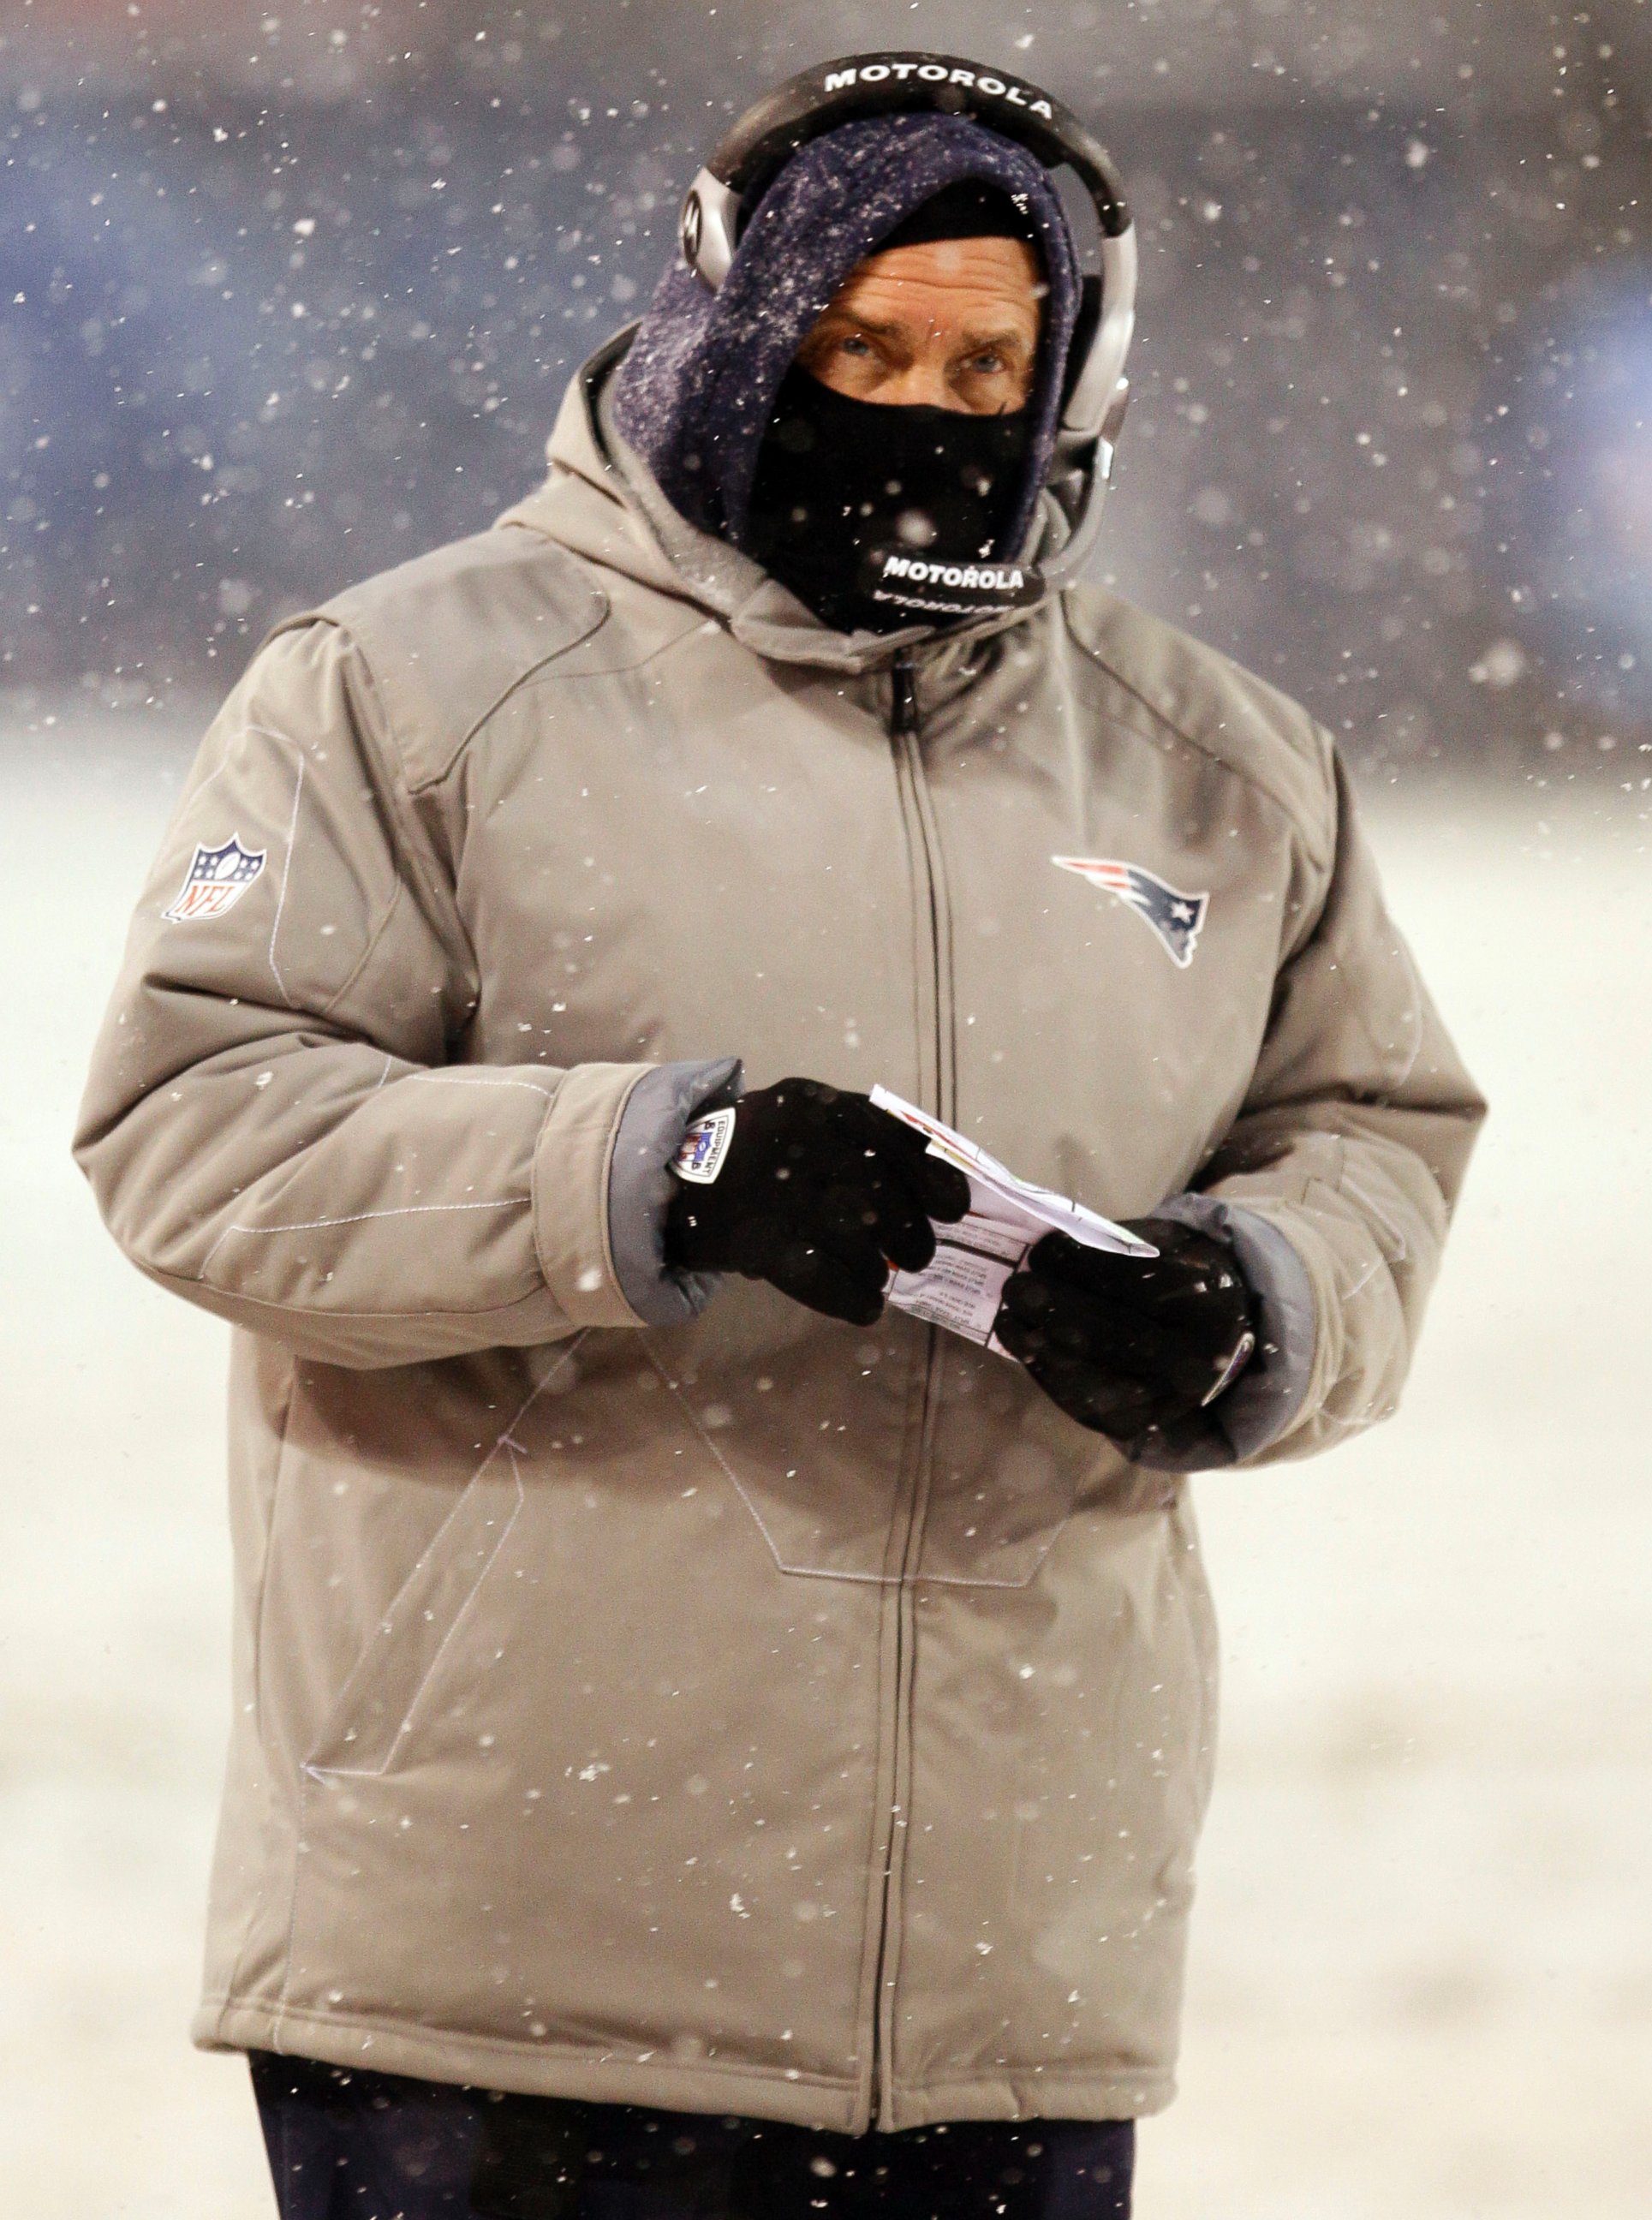 PHOTO: New England Patriots head coach Bill Belichick watches his team in the first half of an NFL football game in the snow against the Chicago Bears in Chicago on Dec. 12, 2010. 